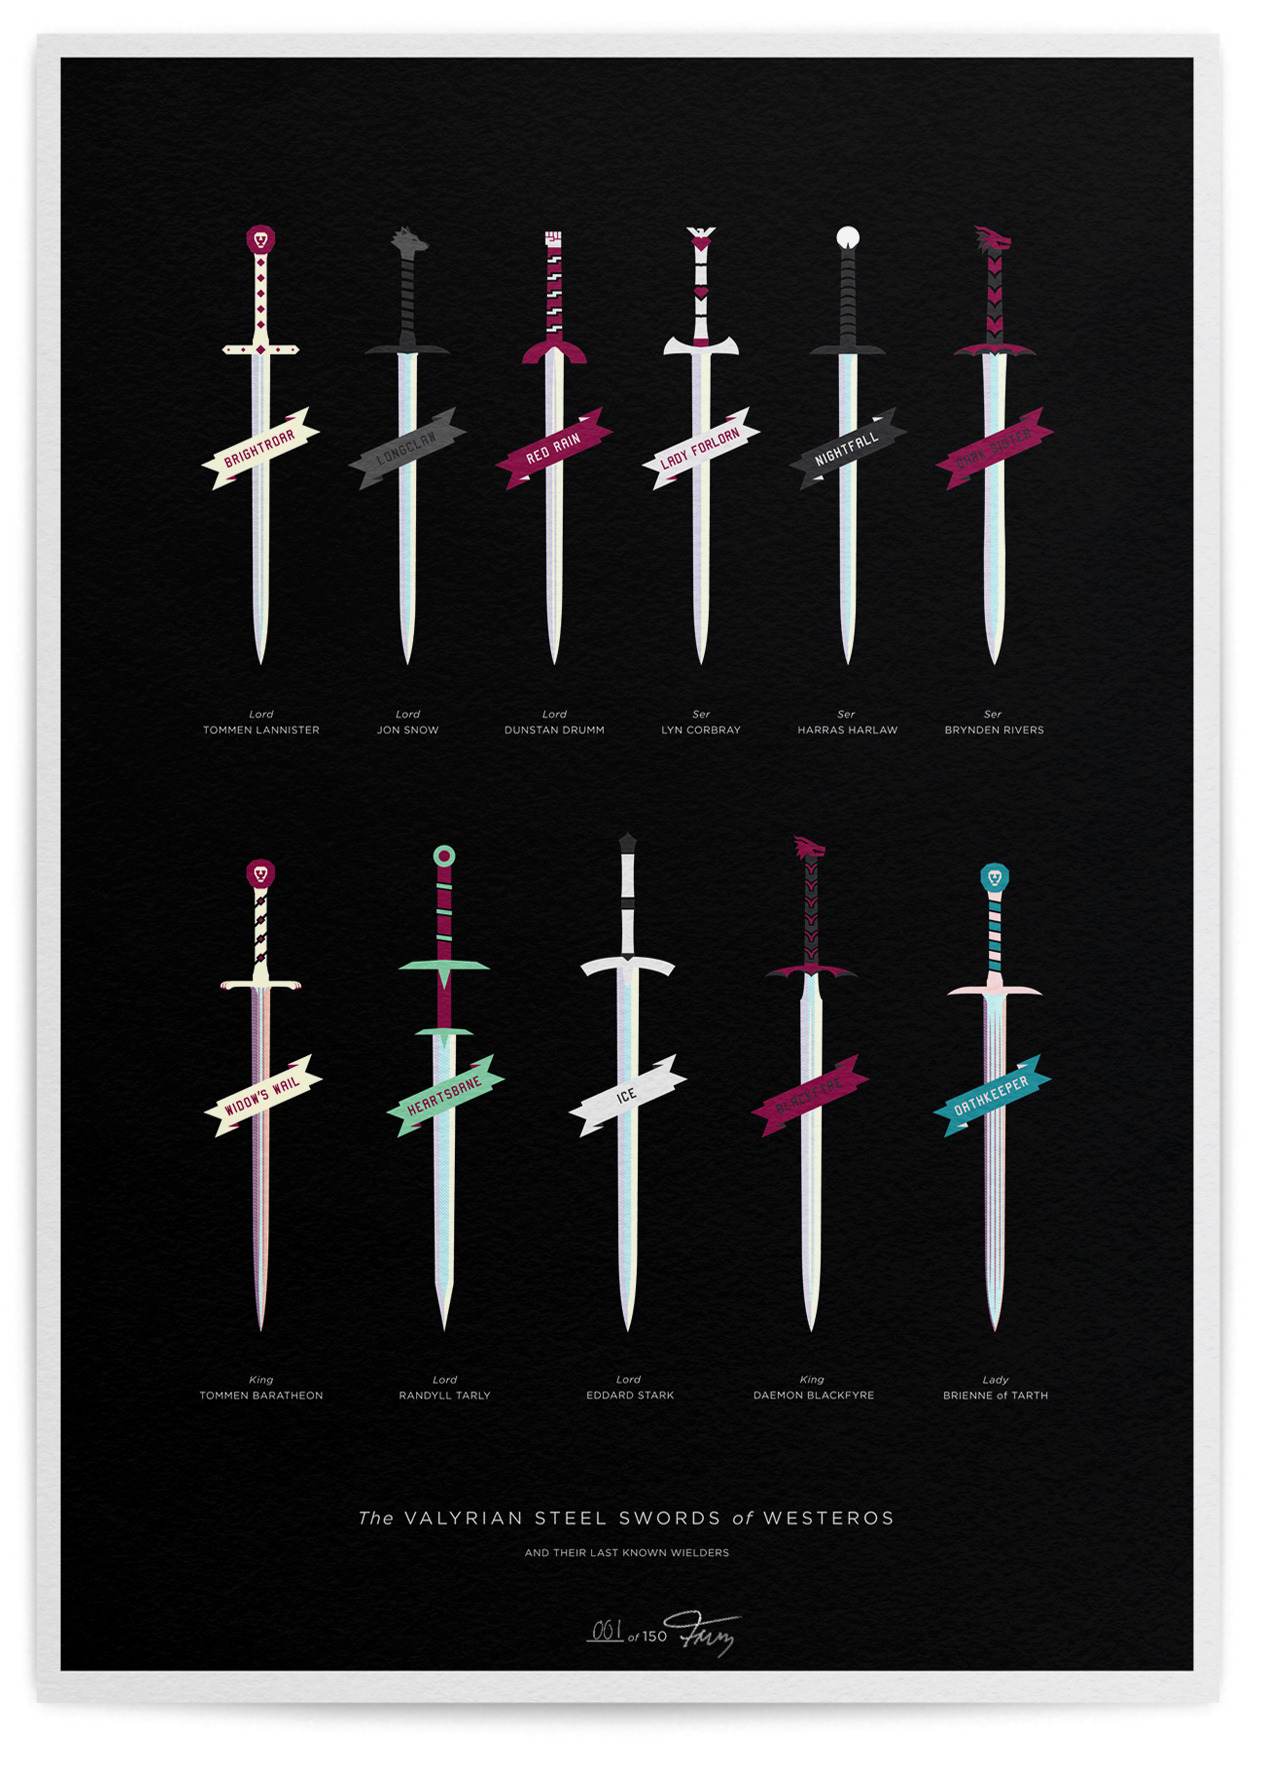 The Valyrian Steel Swords of Westeros - giclée / screen print 16.5” x 23.4” giclée archival pigment inks print with silkscreen varnish, on Hahnemühle German Etching 310gsm paper Hand-numbered edition of 150 Available now from my Shop Inspired by the...